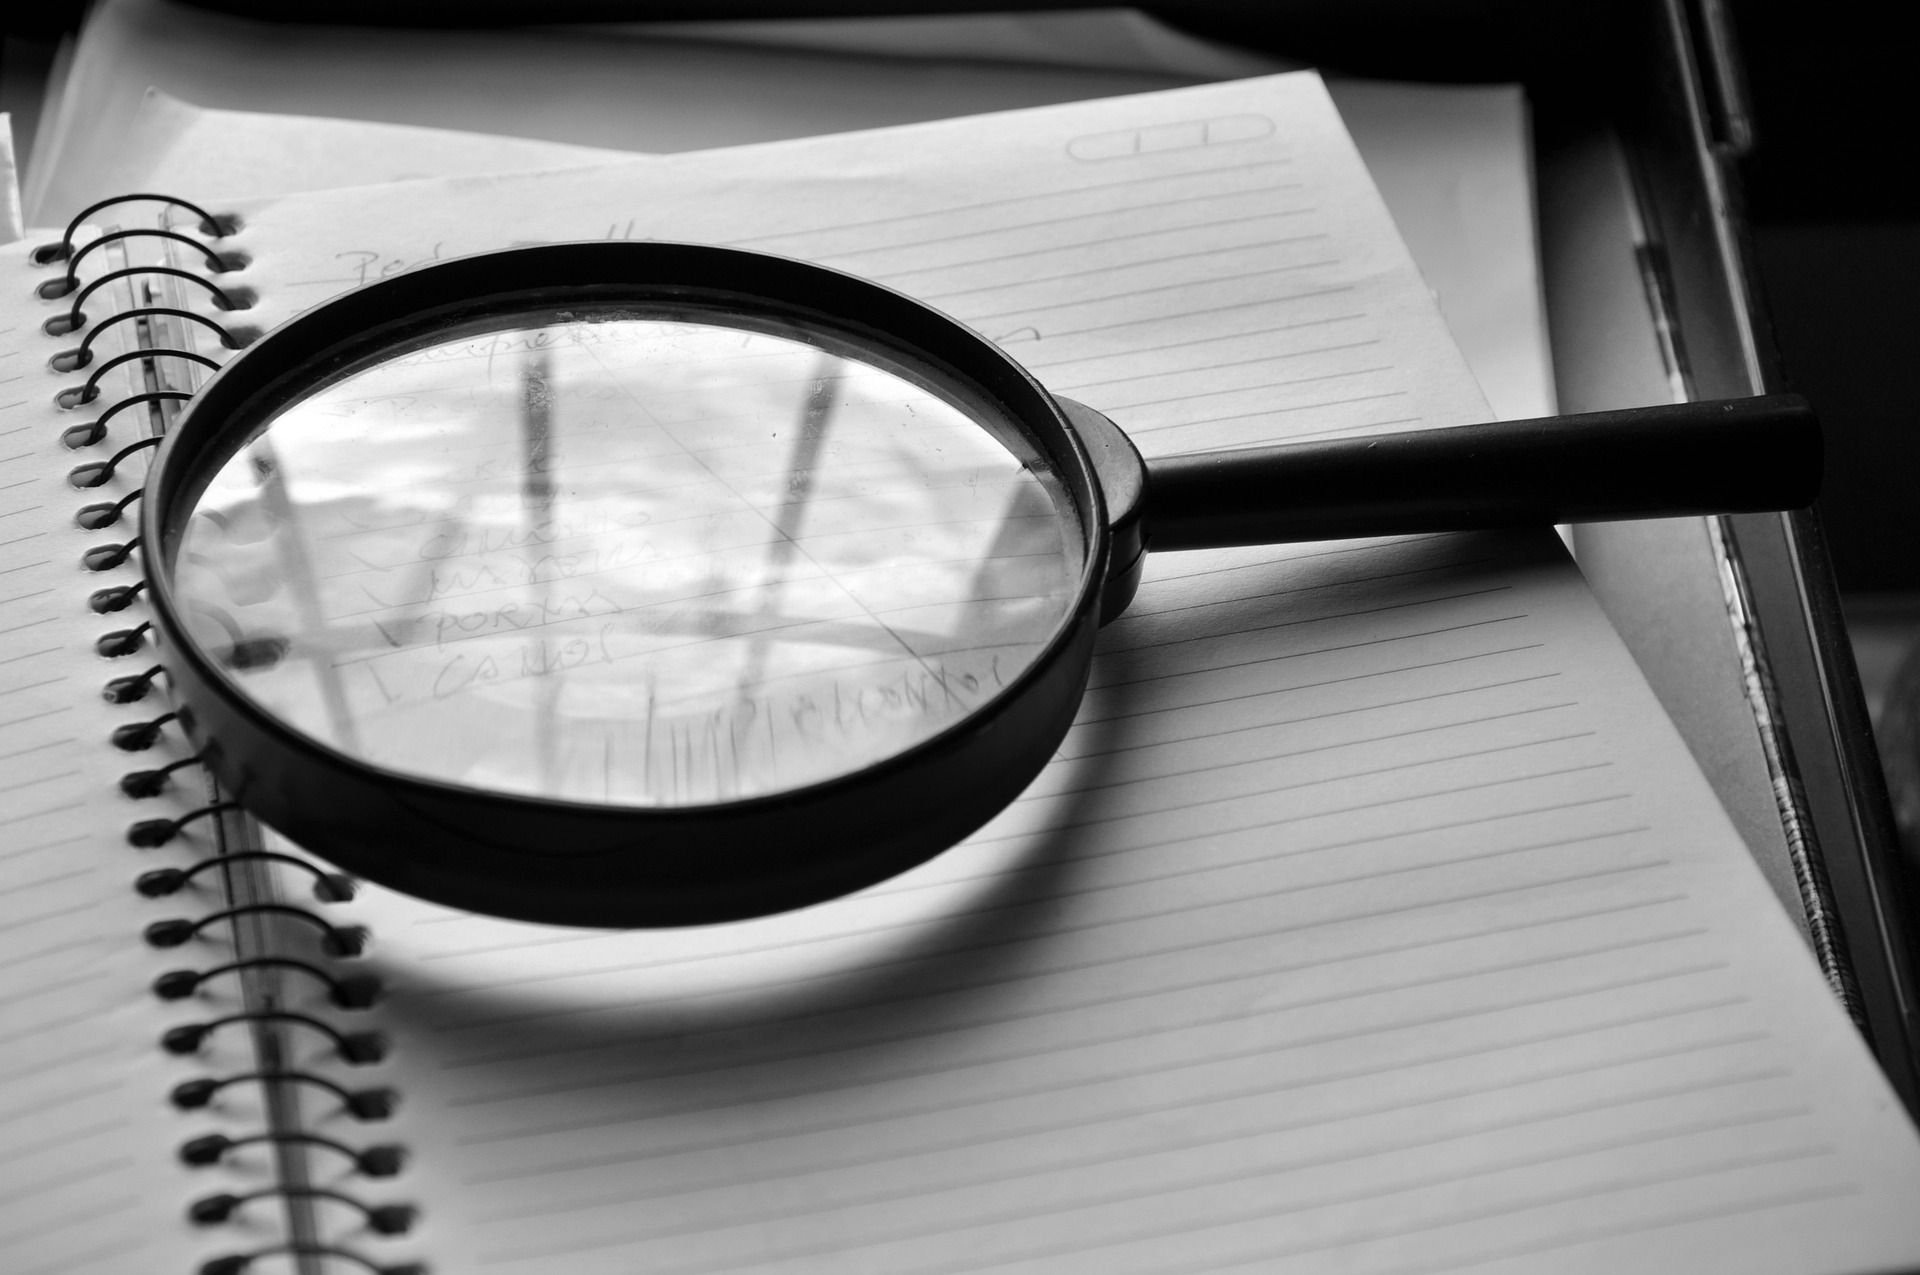 Magnifying glass on a writing pad